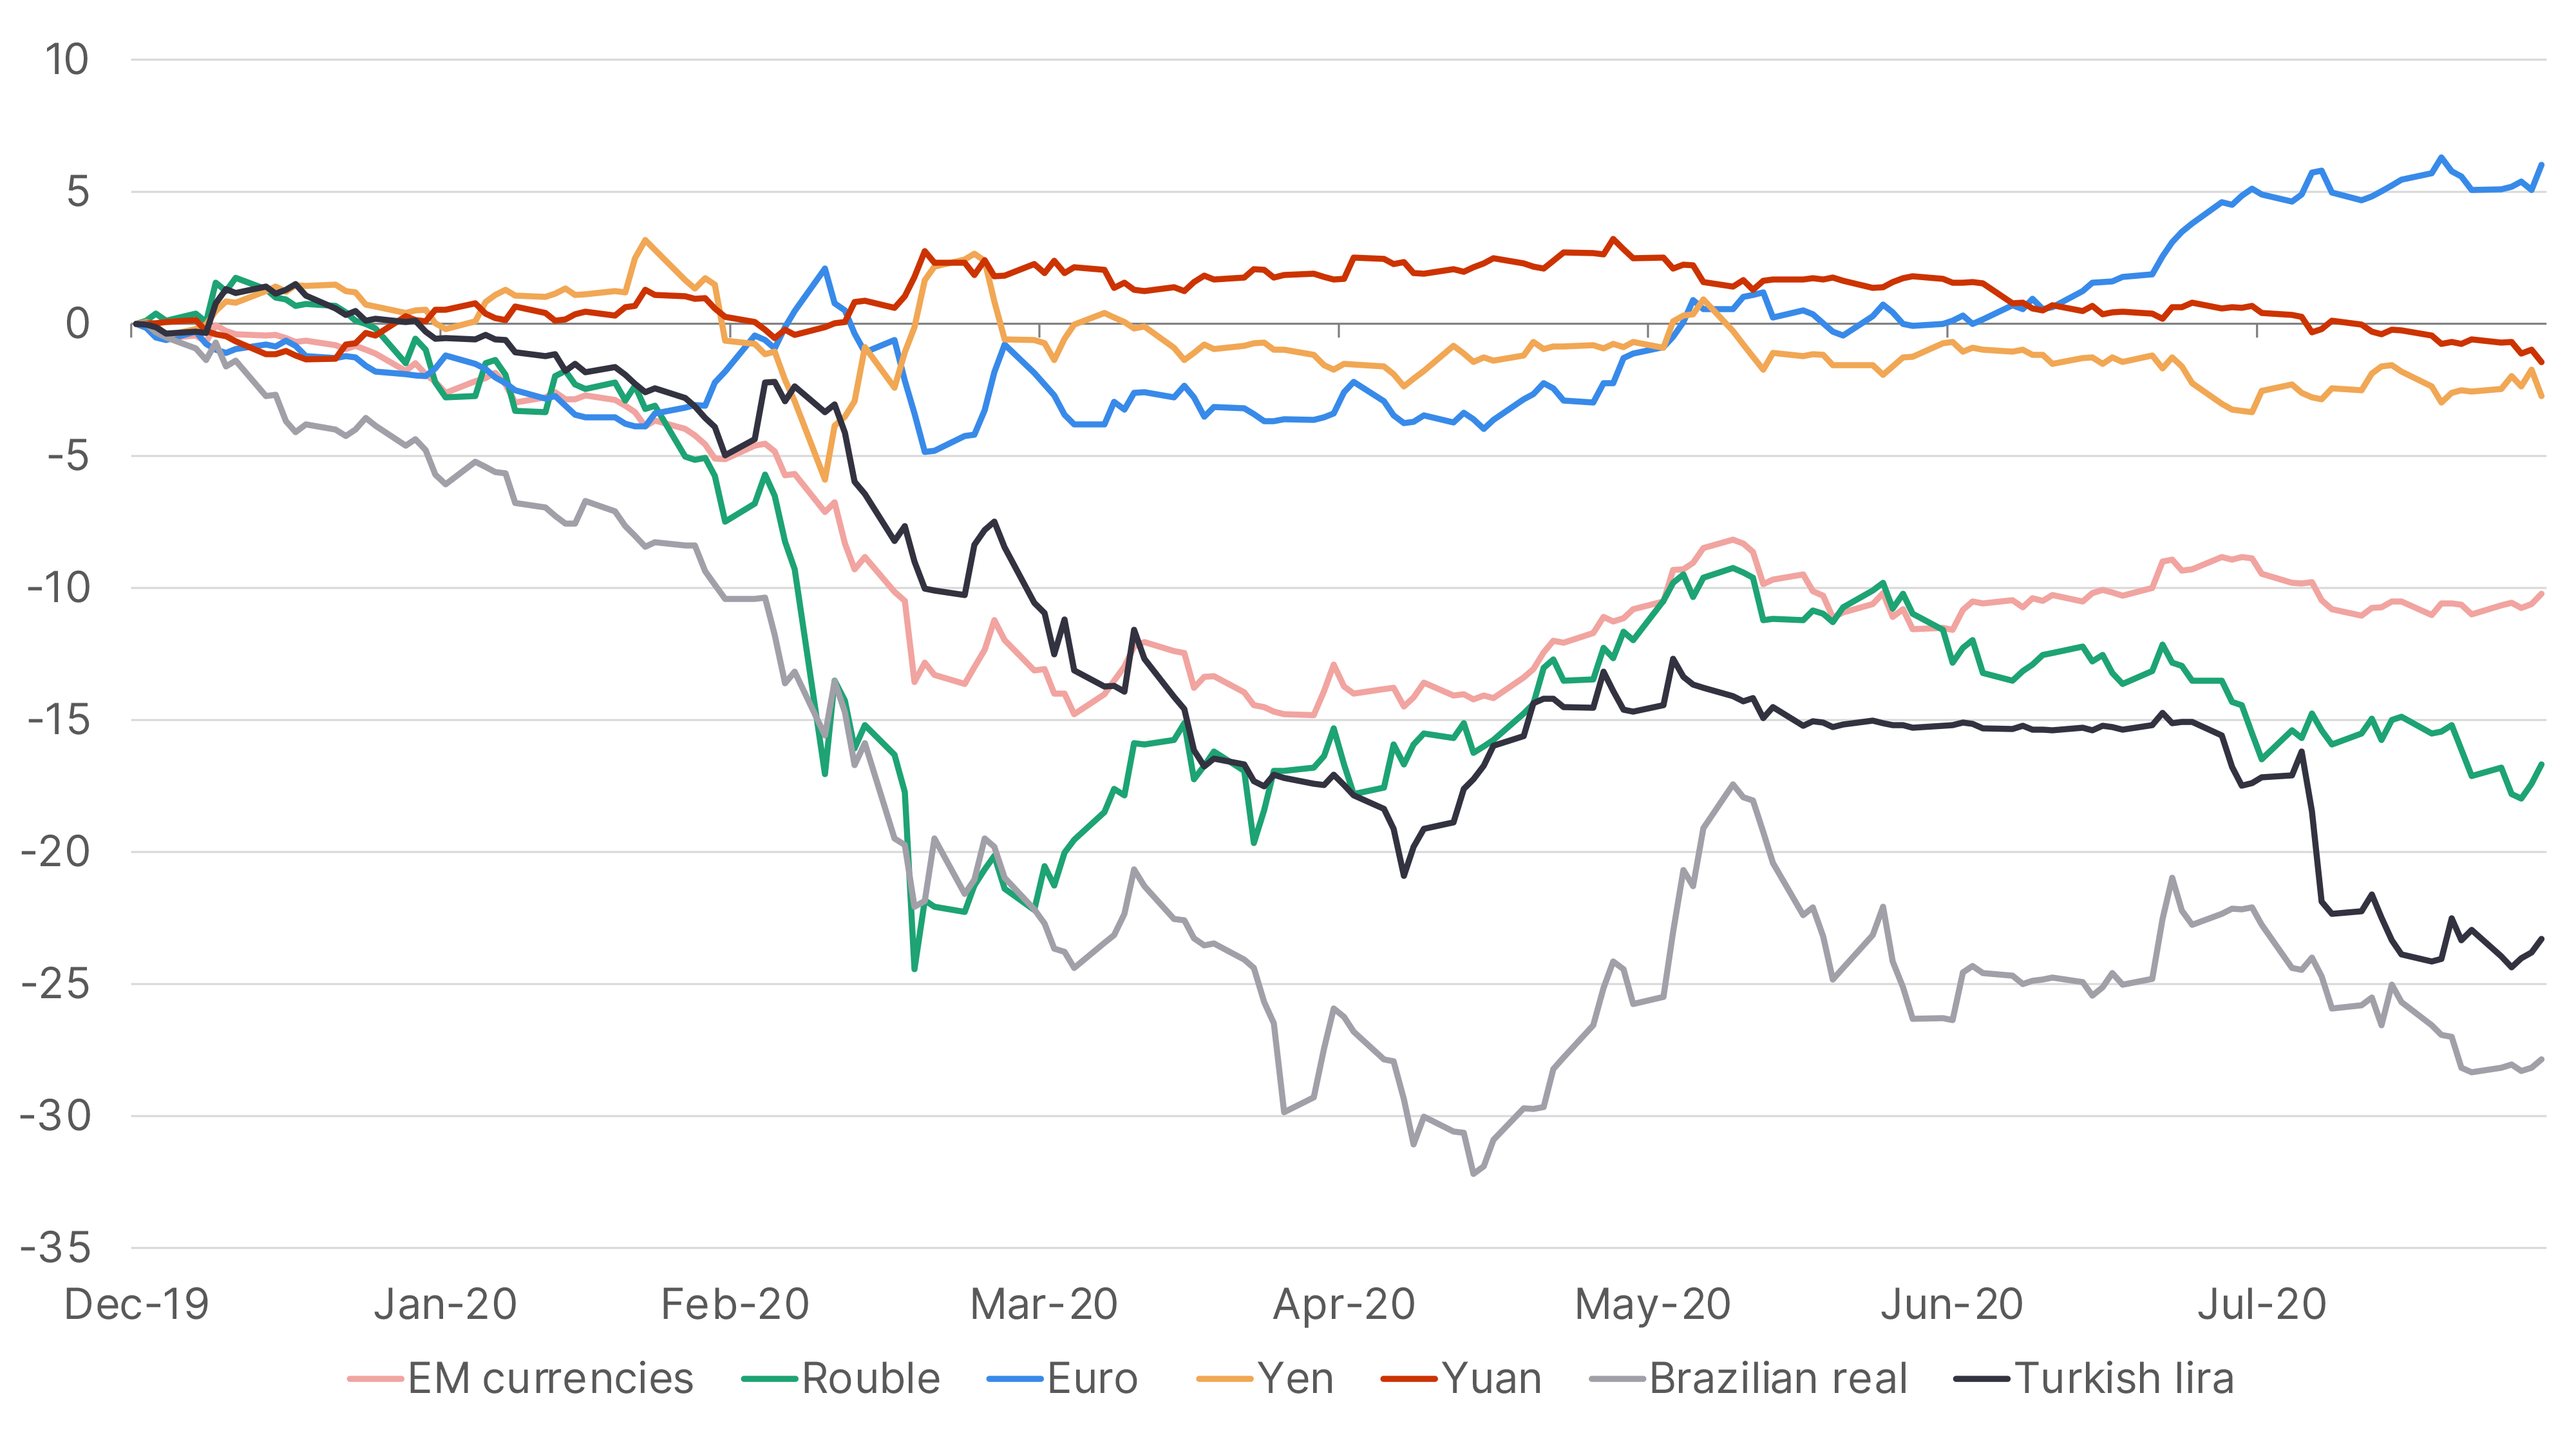 Indices of key currencies vs the US dollar (nominal terms, Dec 2019=100)